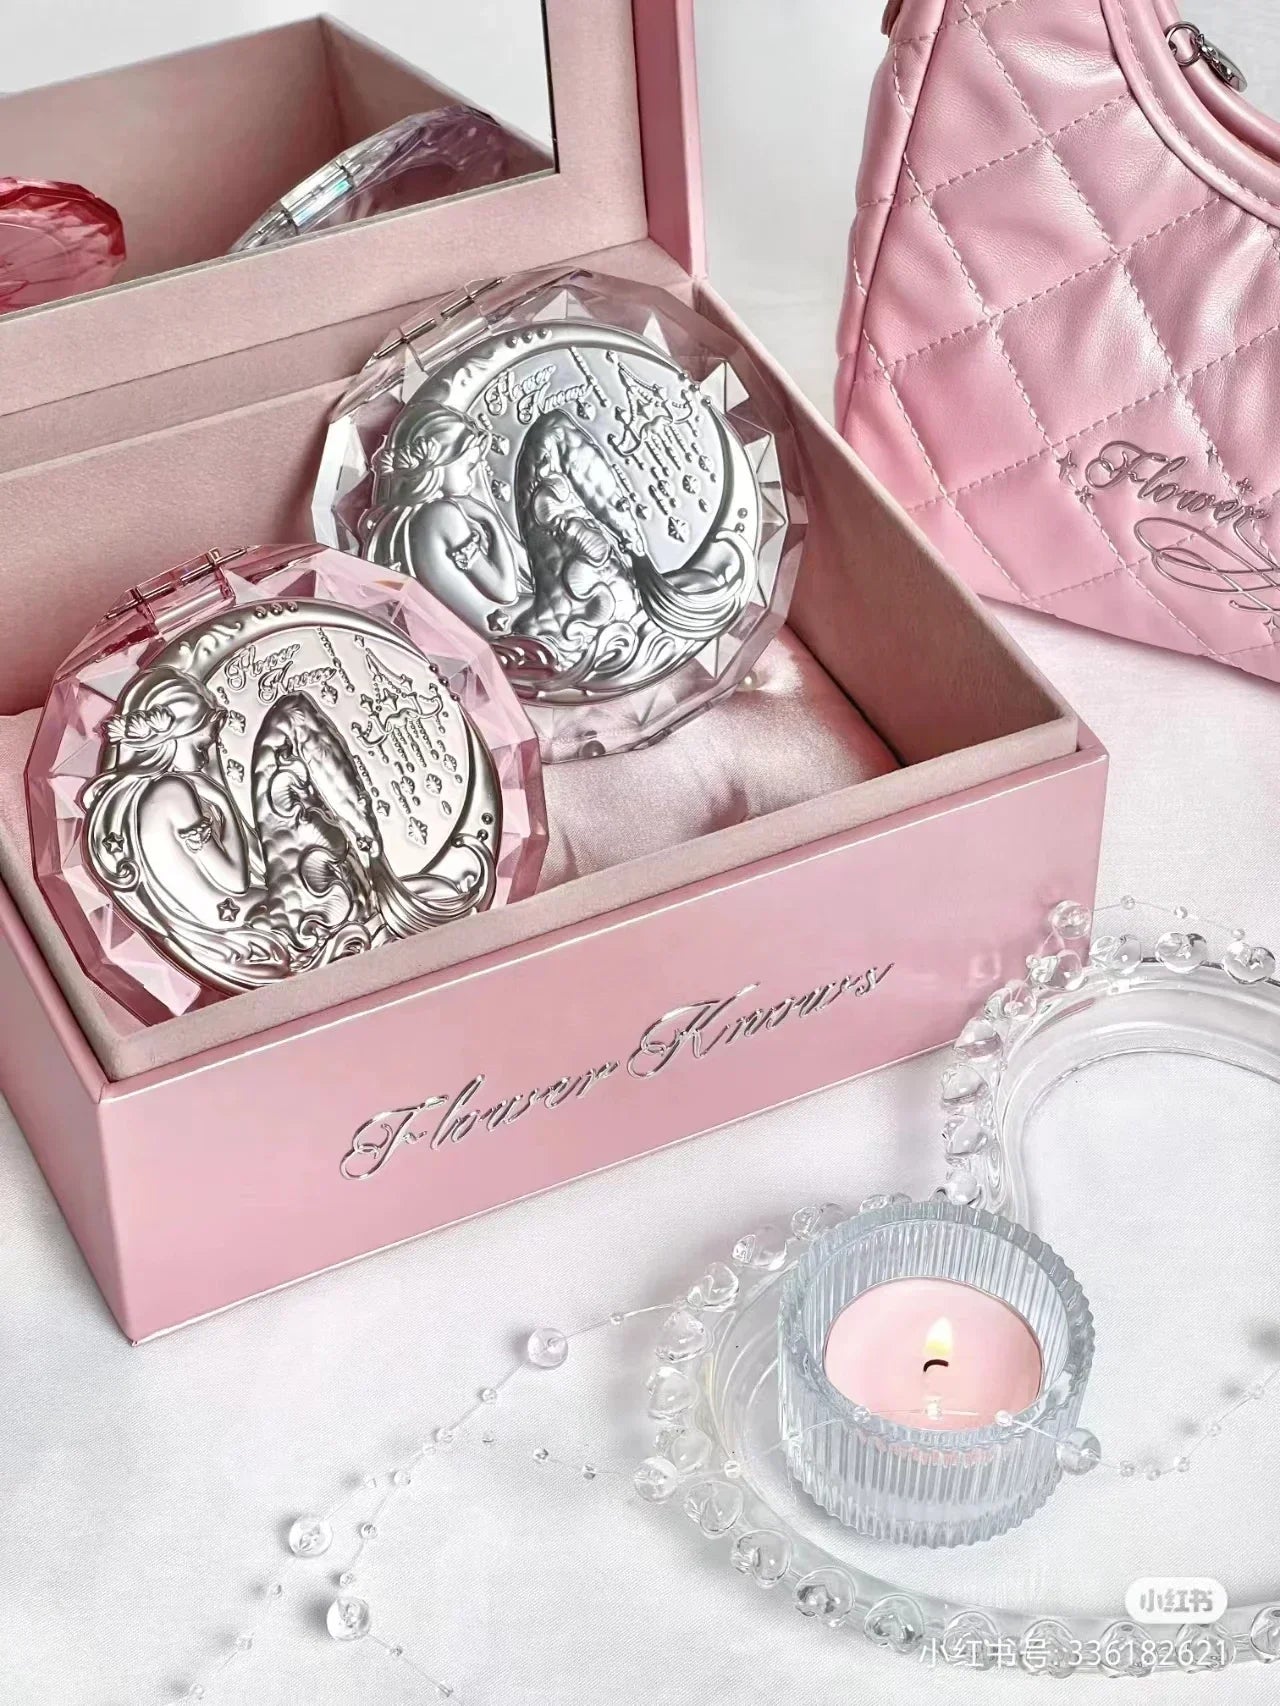 a pink purse and two silver coin sets in a pink box